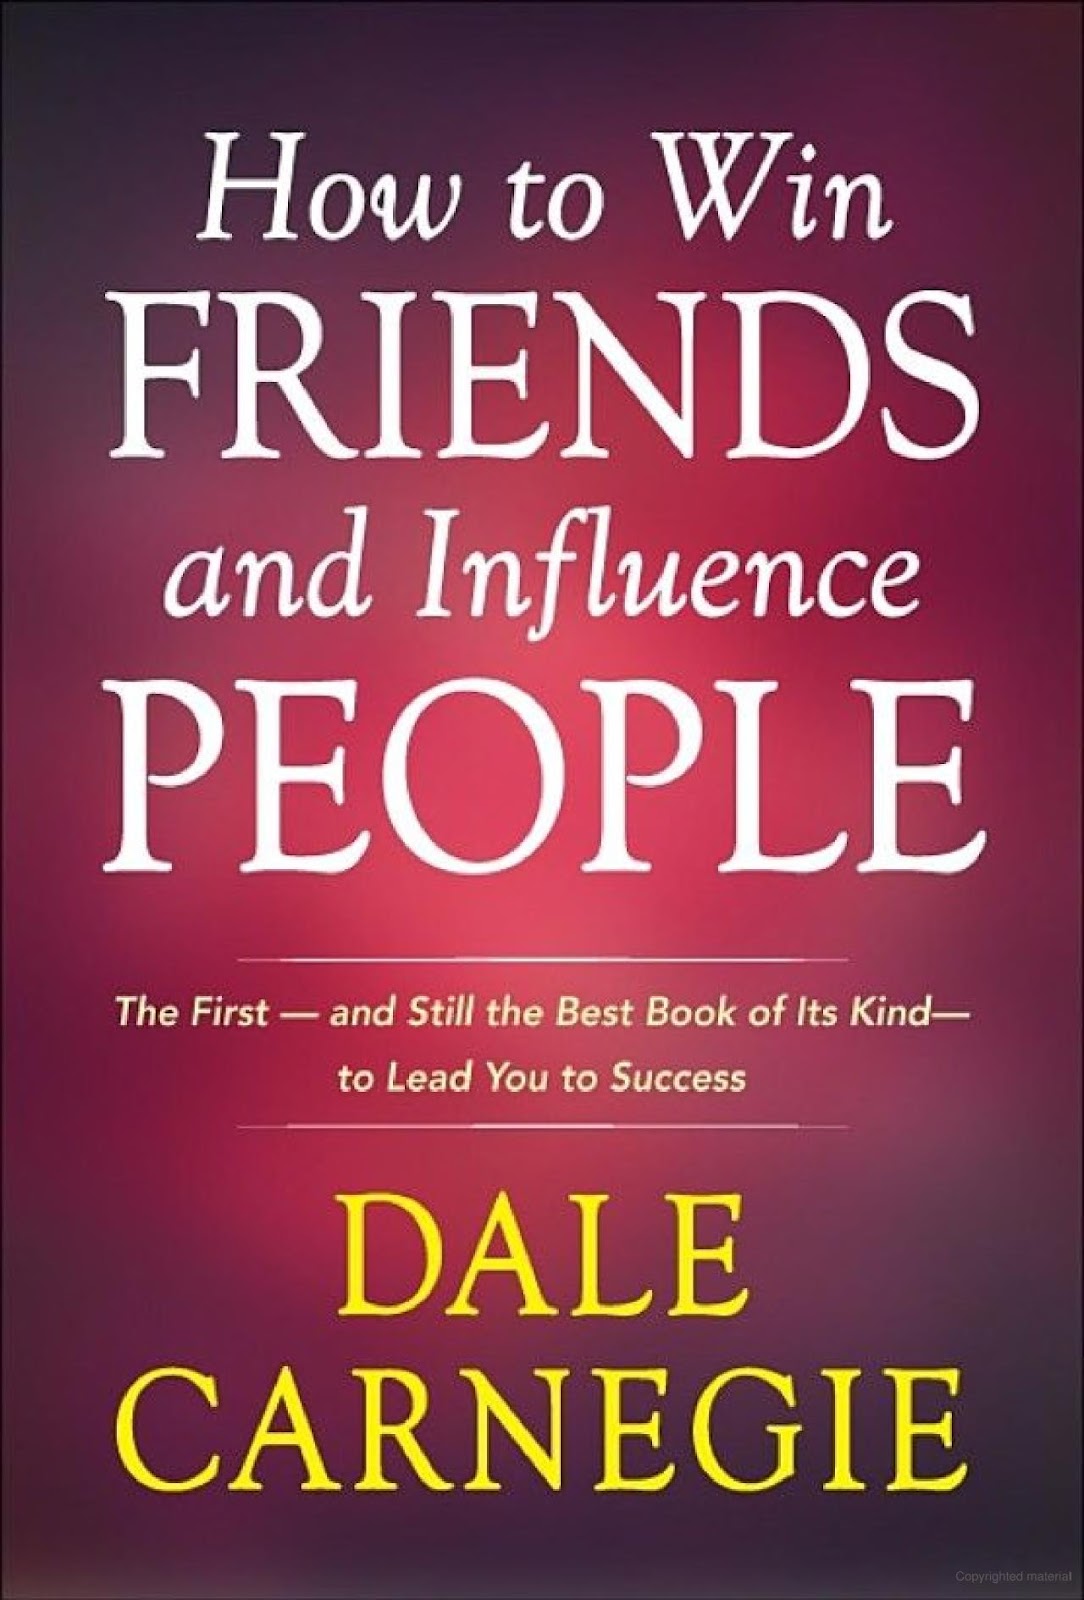 business book - how to win friends and influence people